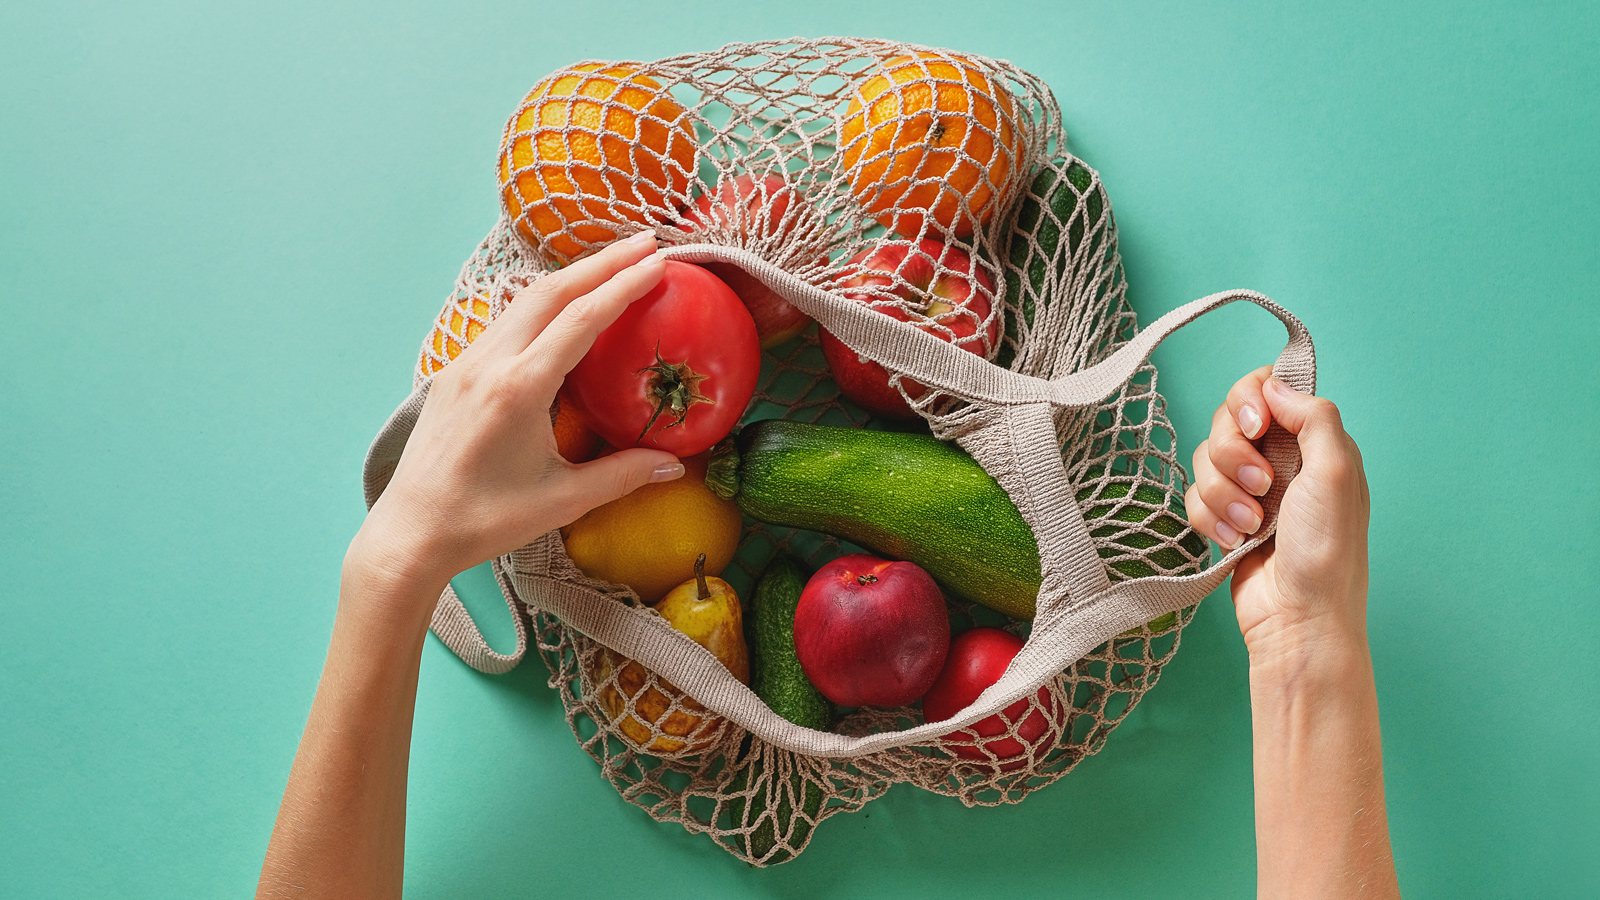 Fresh juicy fruits and vegetables, products in a reusable shopping bag. A girl or woman takes or lays out products from a string bag made from recycled materials on a Green Pastel background. Vegetarianism, Veganism. No plastic.